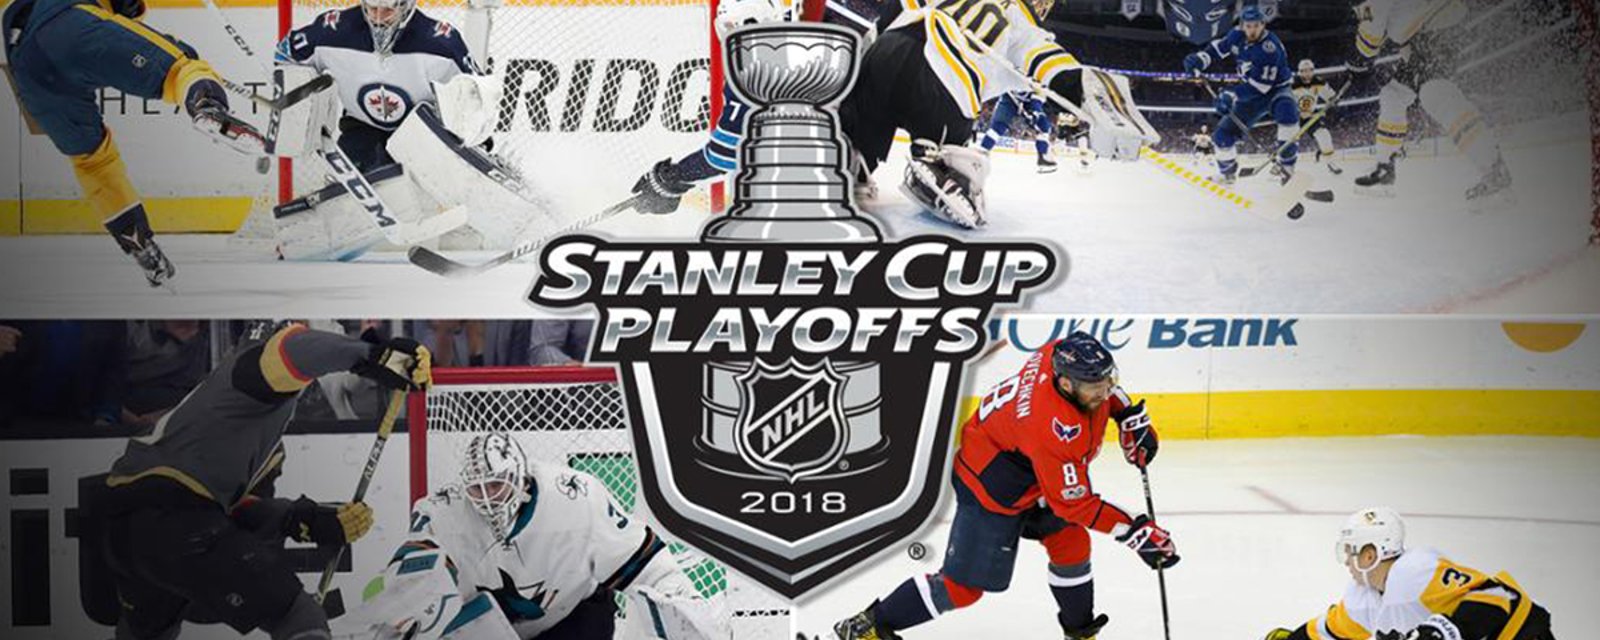 Report: A 24 team Stanley Cup Playoff bracket is “inevitable”